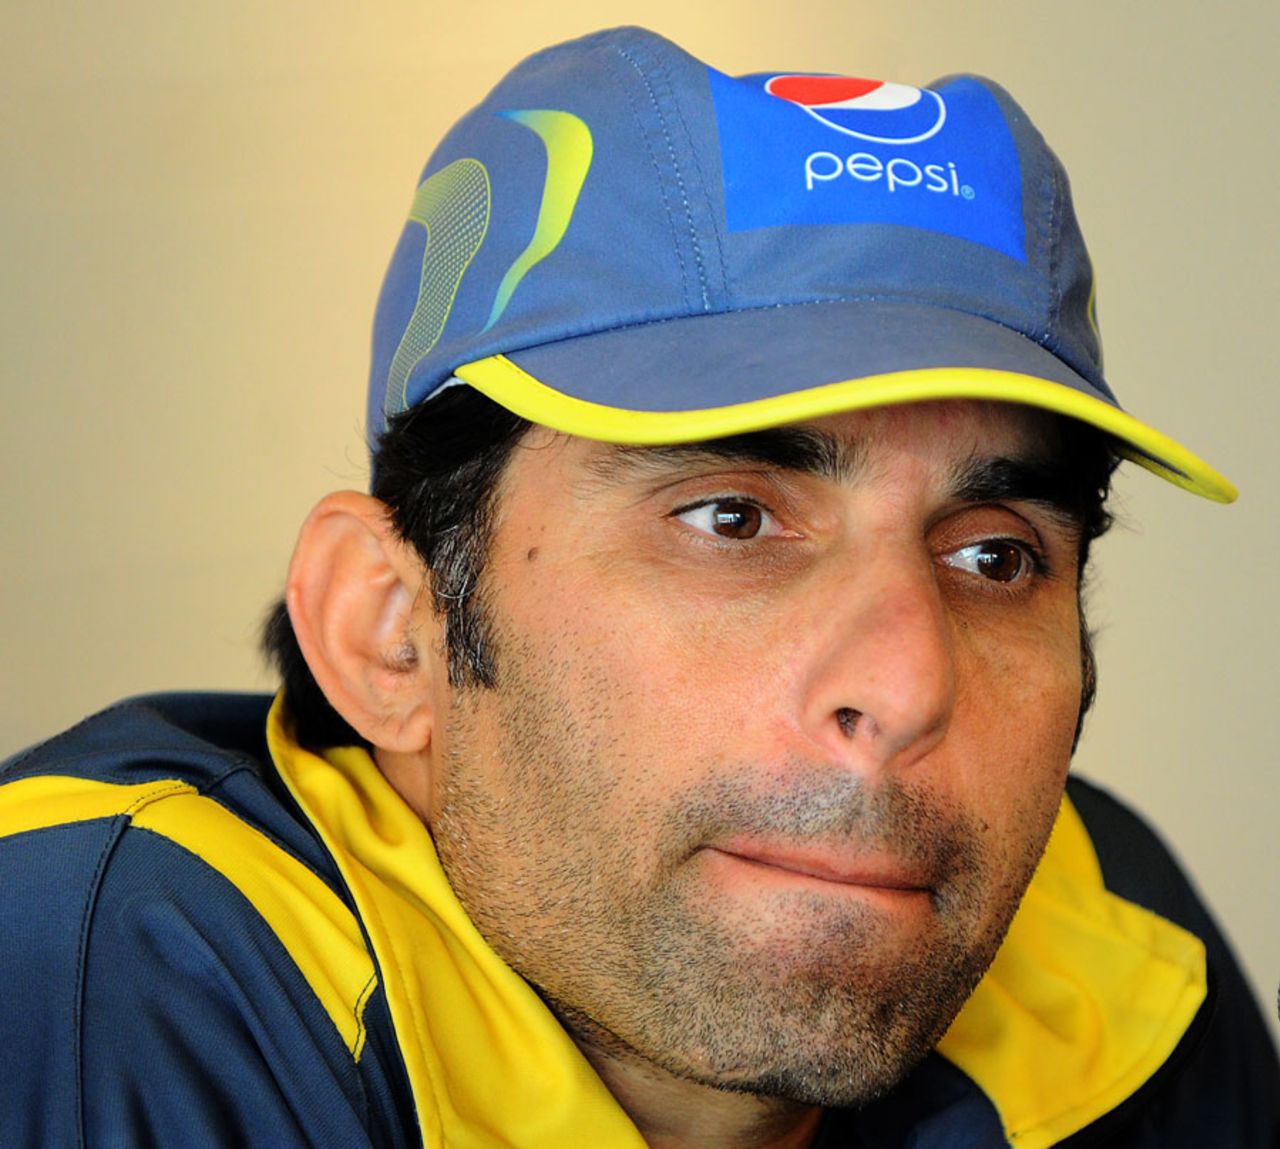 Misbah-ul-Haq looks on during a press conference, Abu Dhabi, December 30, 2013